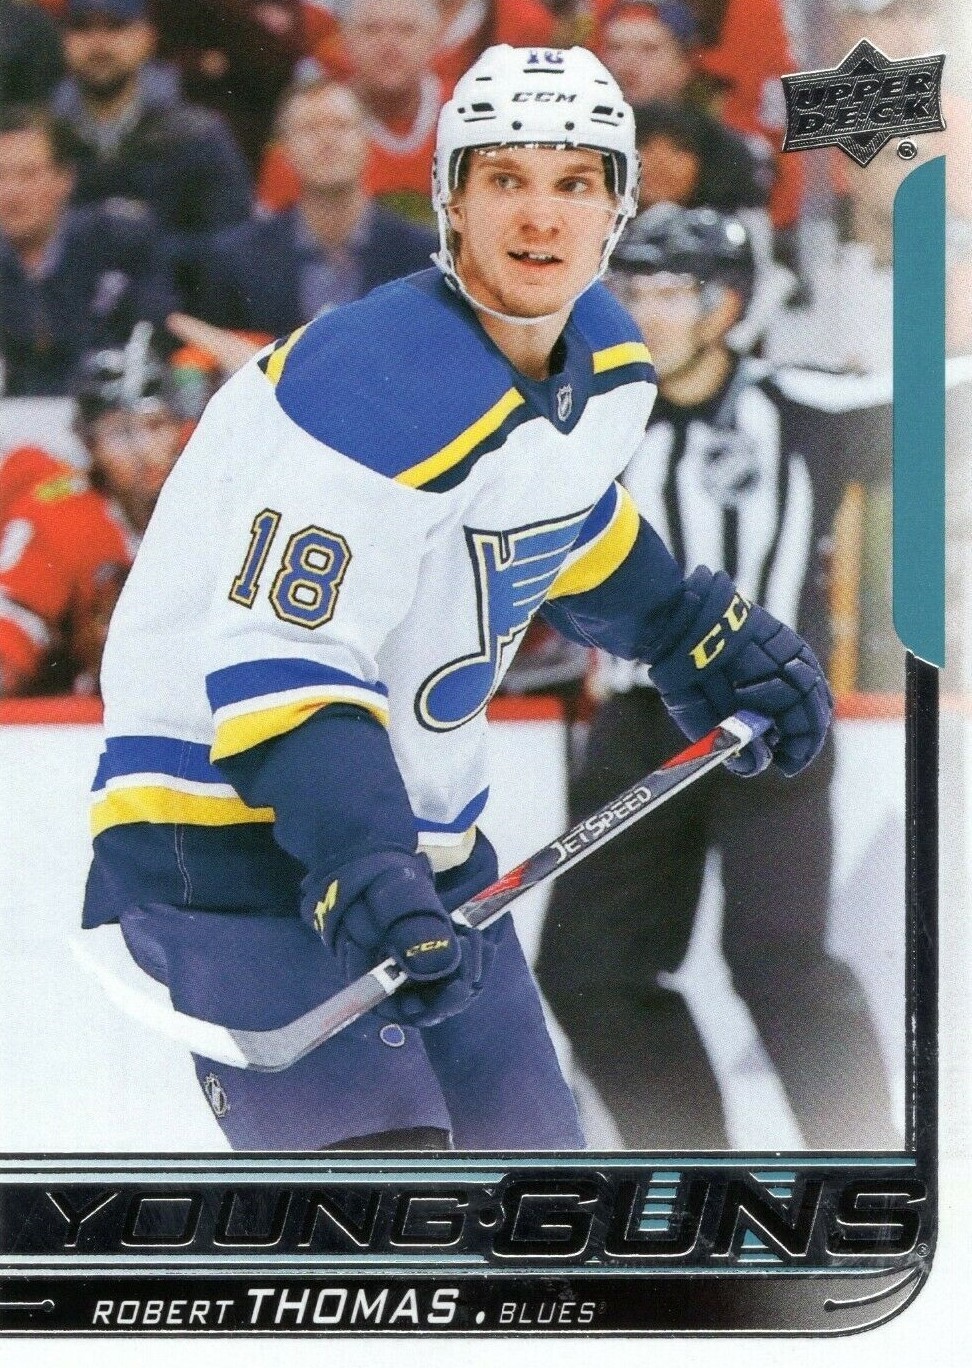 2018-19 Upper Deck 2019 STANLEY CUP CHAMPIONS BLUES ROBERT THOMAS RC QTY AVAIL 